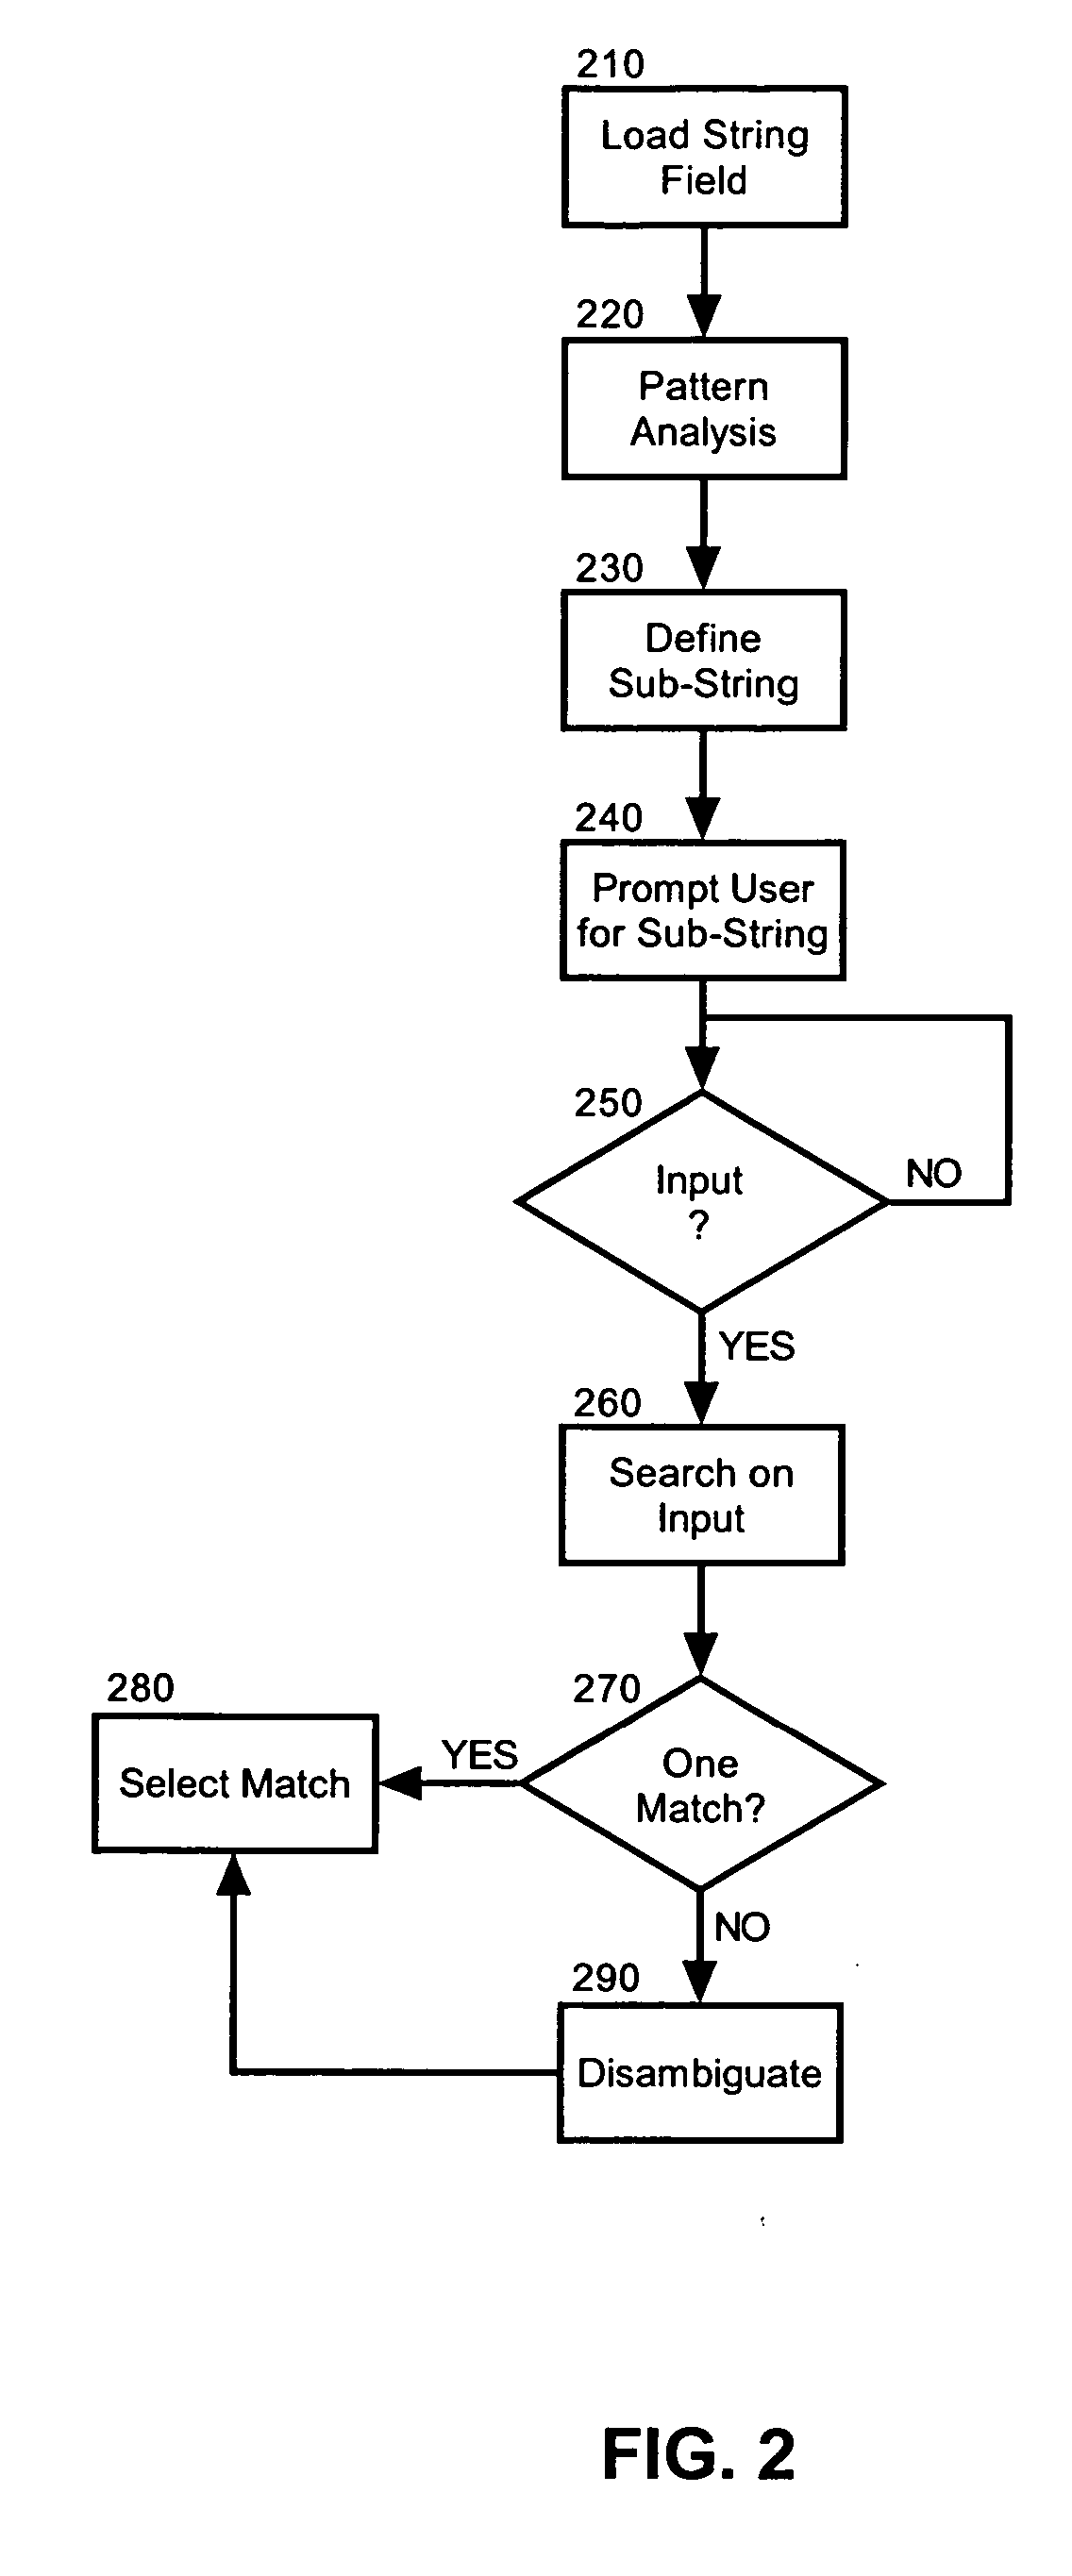 Speech disambiguation for string processing in an interactive voice response system